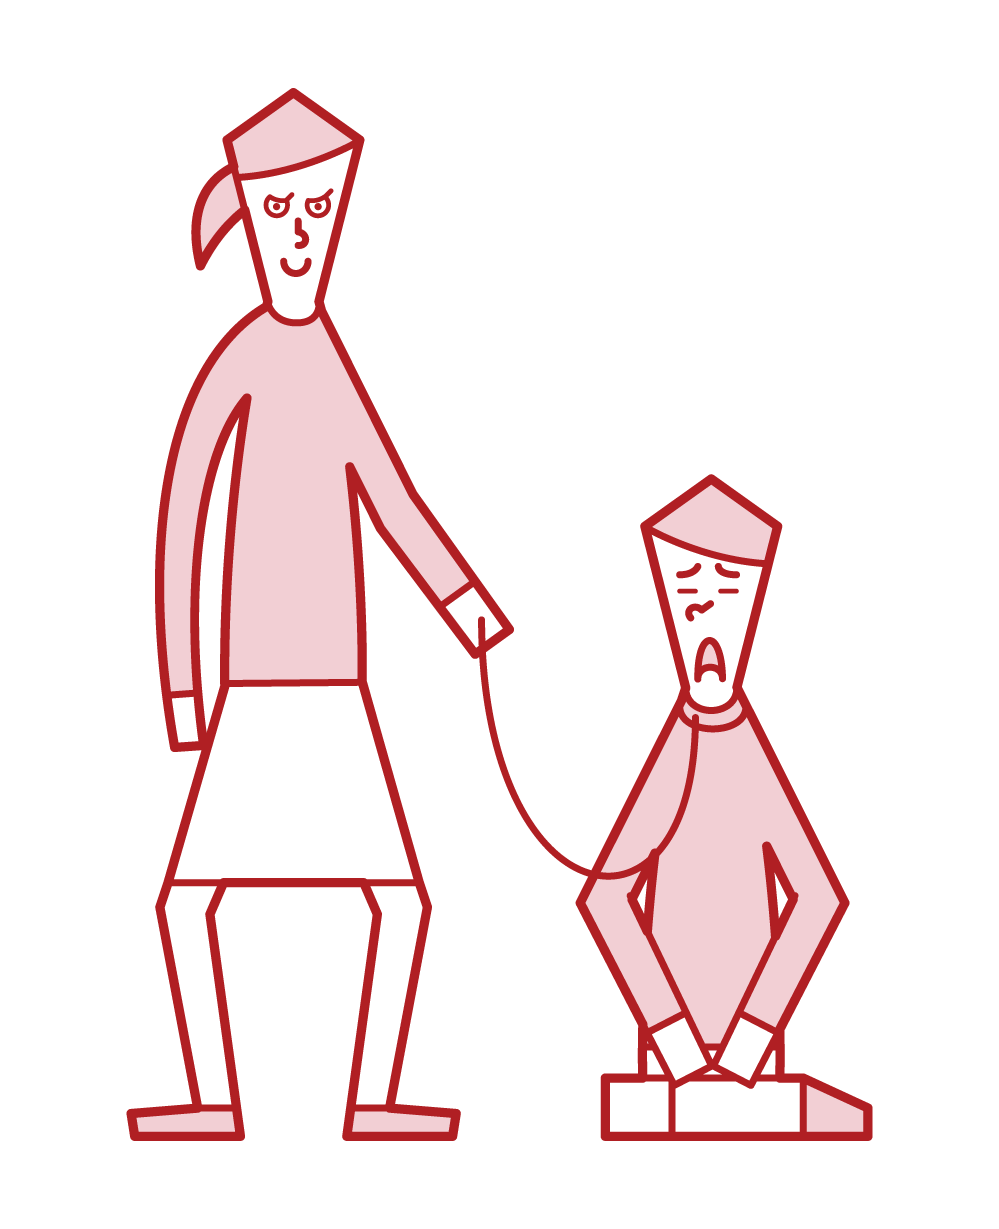 Illustration of a person (female) who submits a man